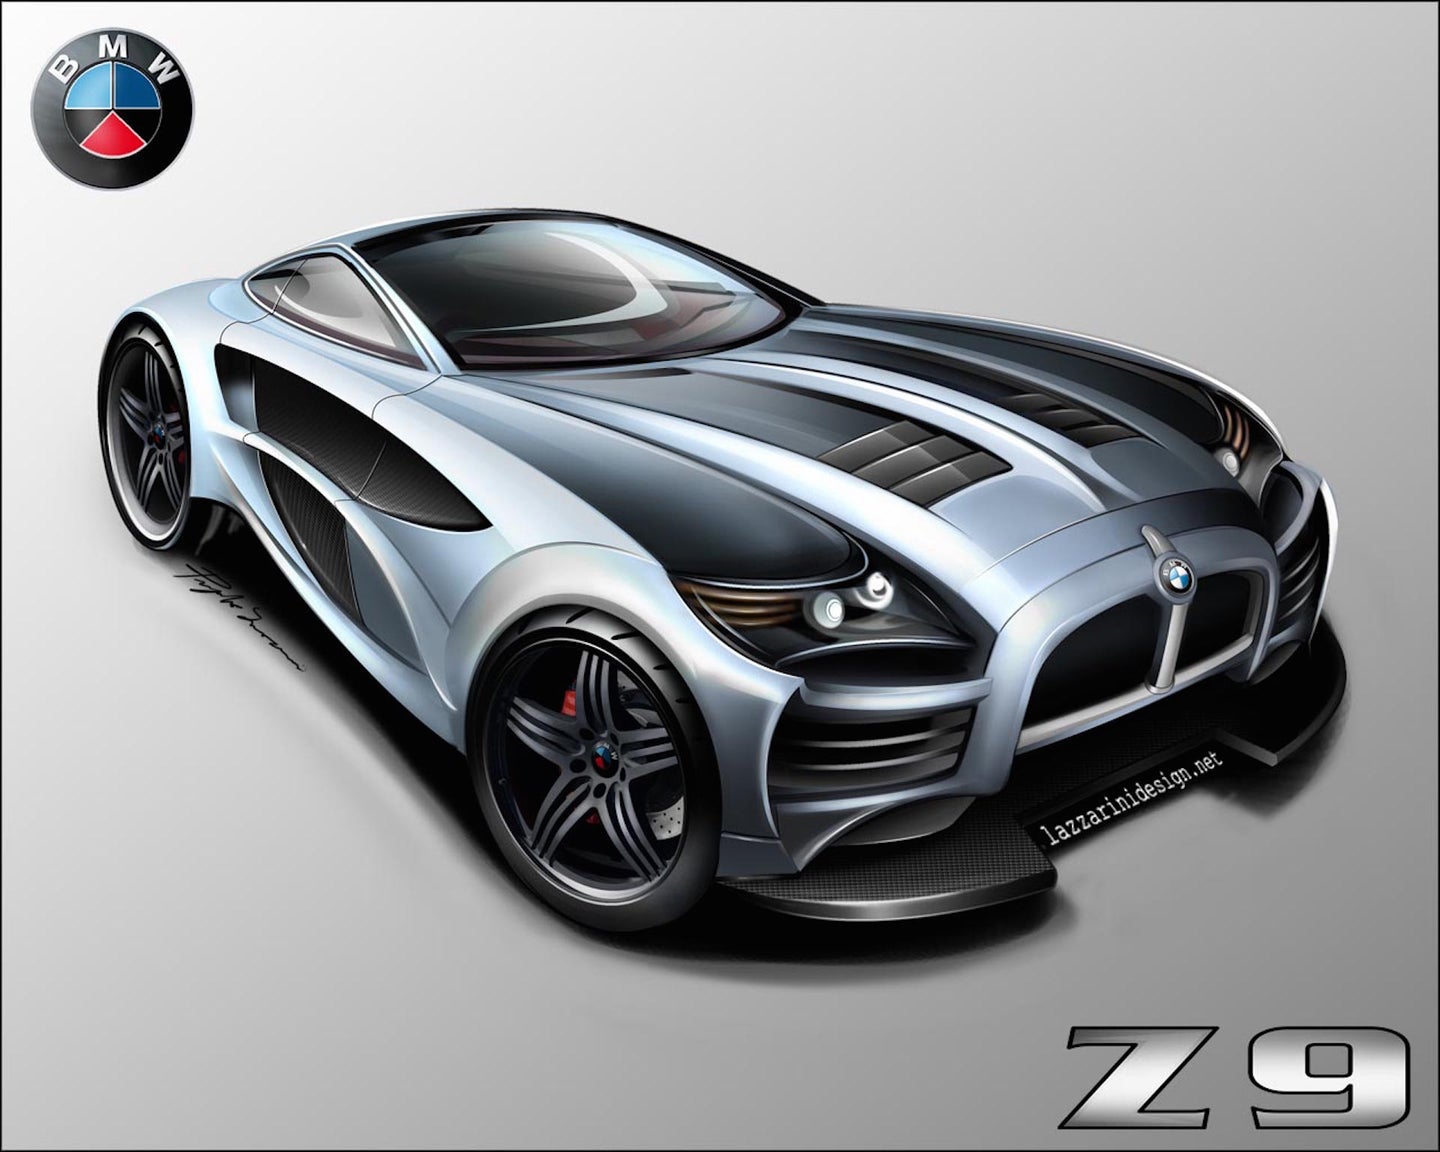 Here’s What the BMW Z9 Might Look Like According to Lazzarini